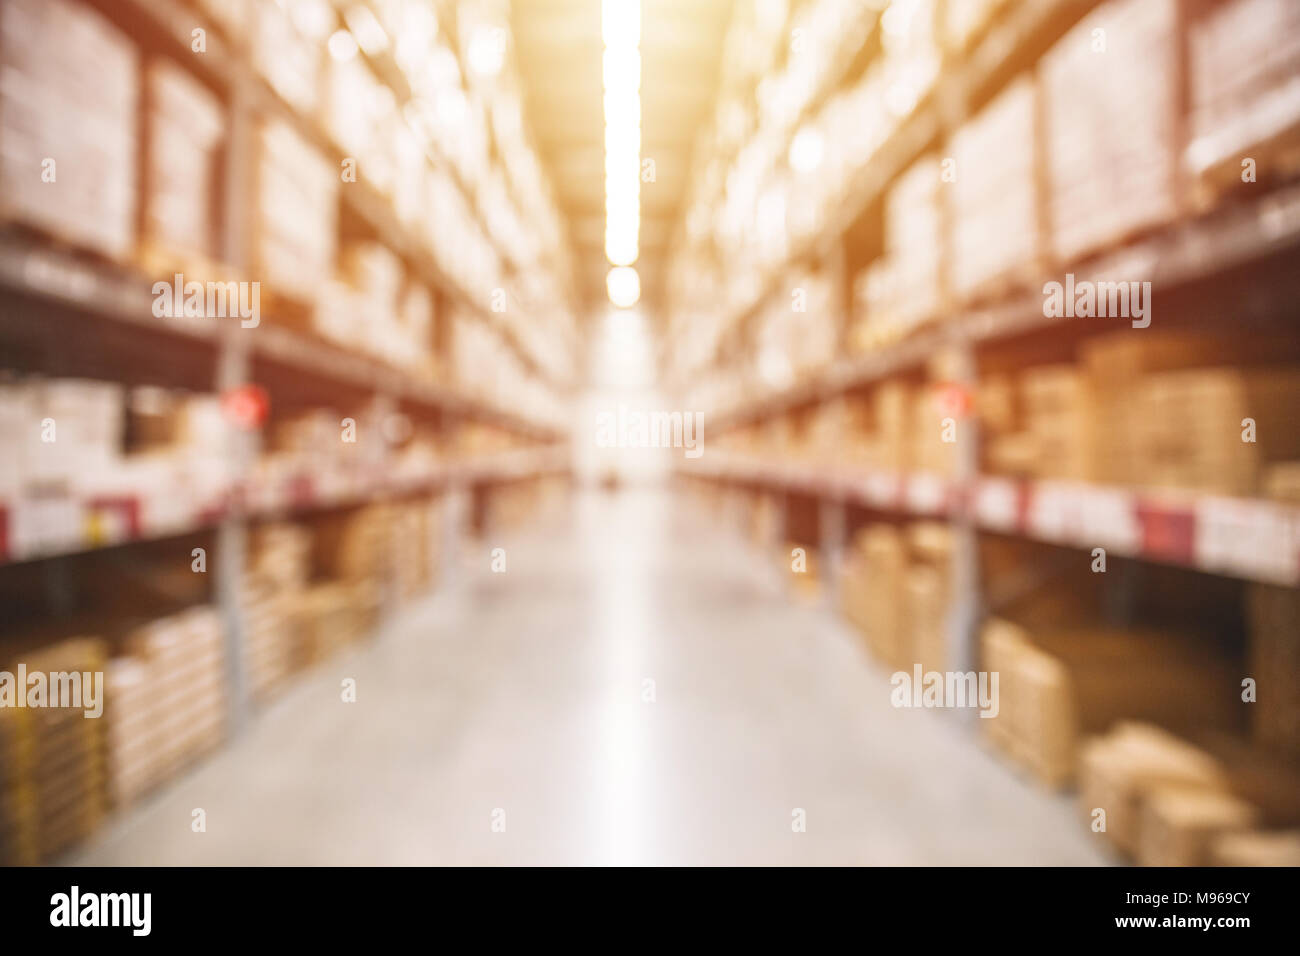 Blur Warehouse inventory product stock for logistic background Stock Photo